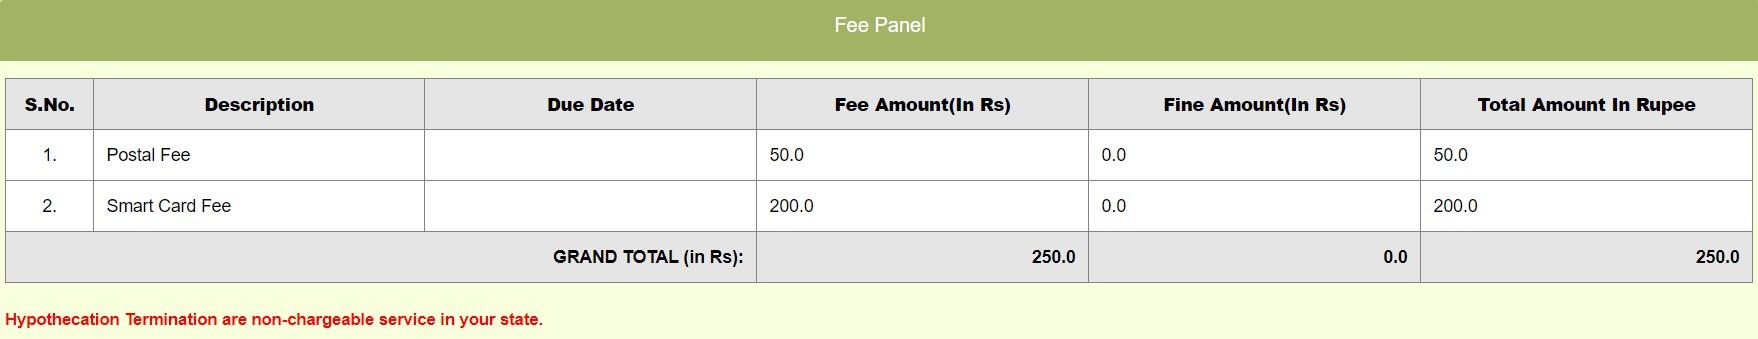 applicable fee for hypothecation termination